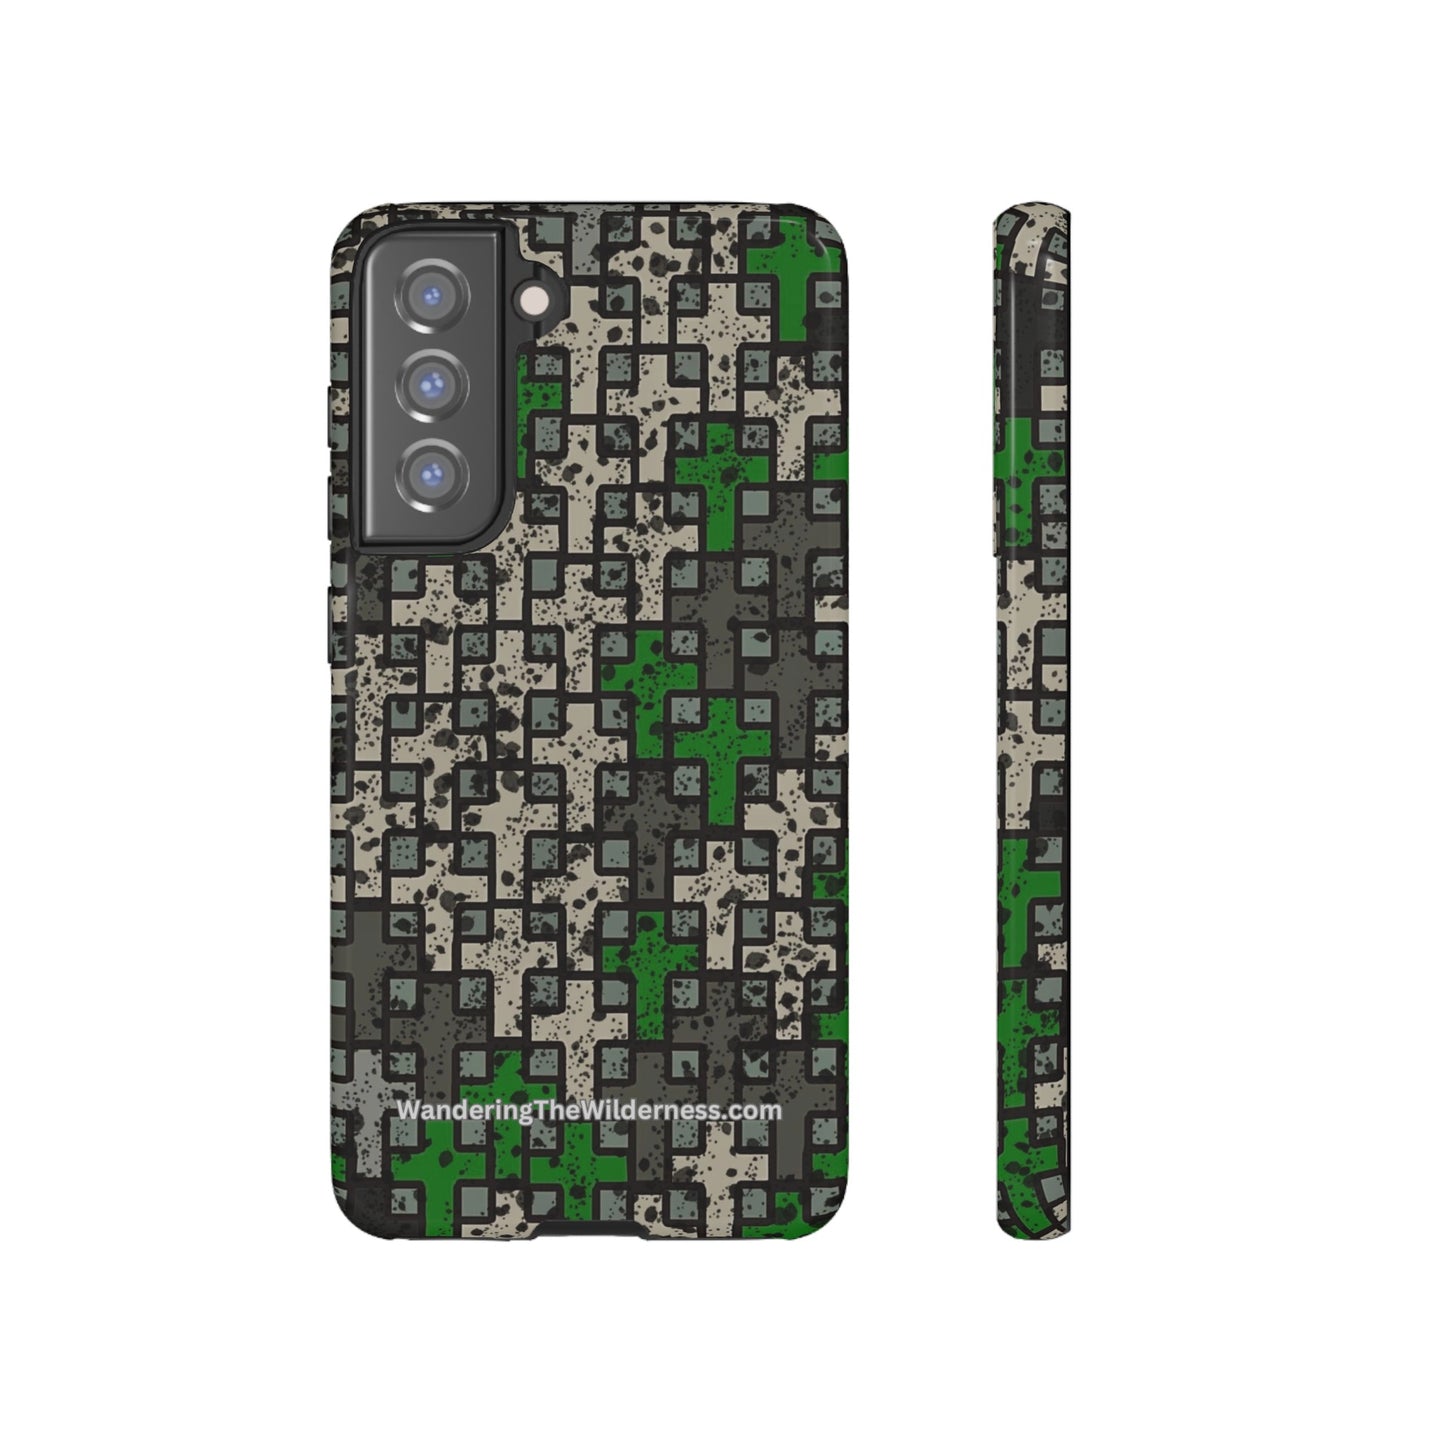 Wandering the Wilderness Hickory Flats camo Tough Cases